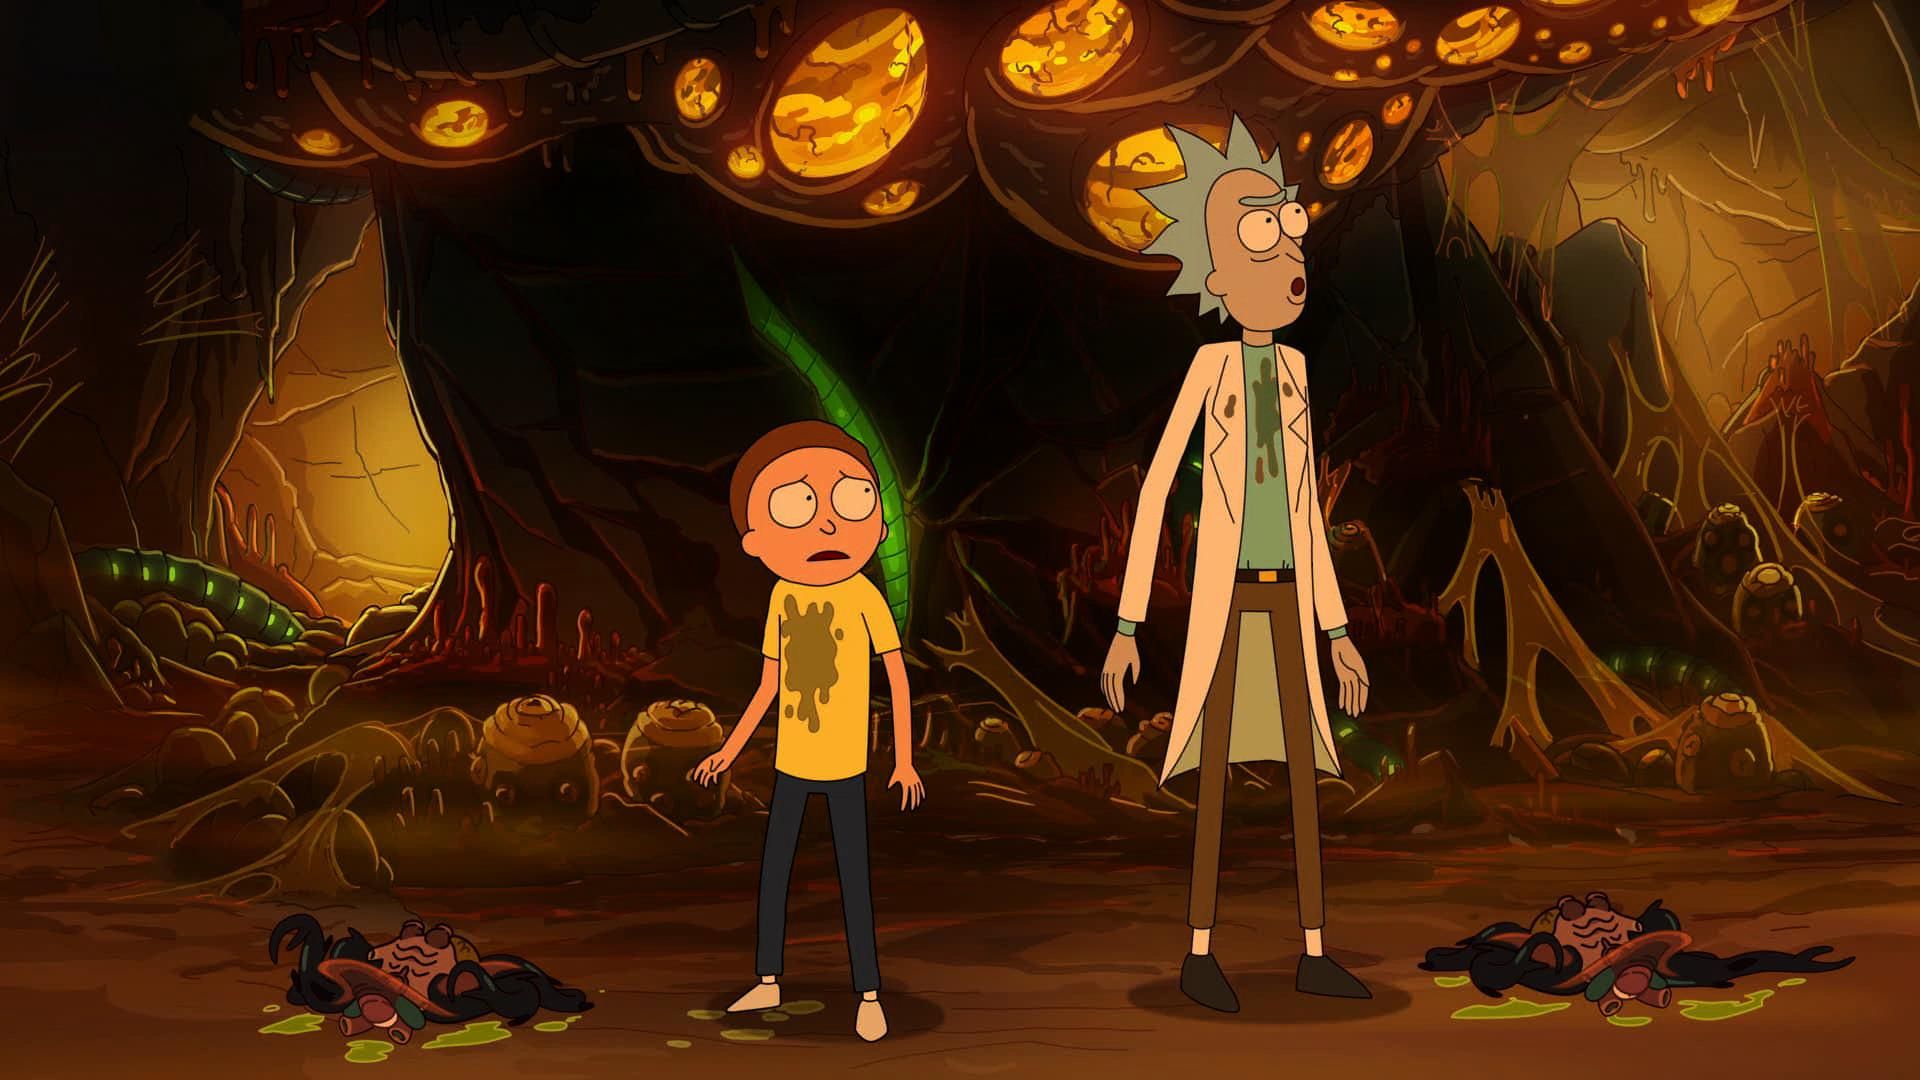 Join Rick and Morty on AdultSwim.com as they trek through alternate dimensi...